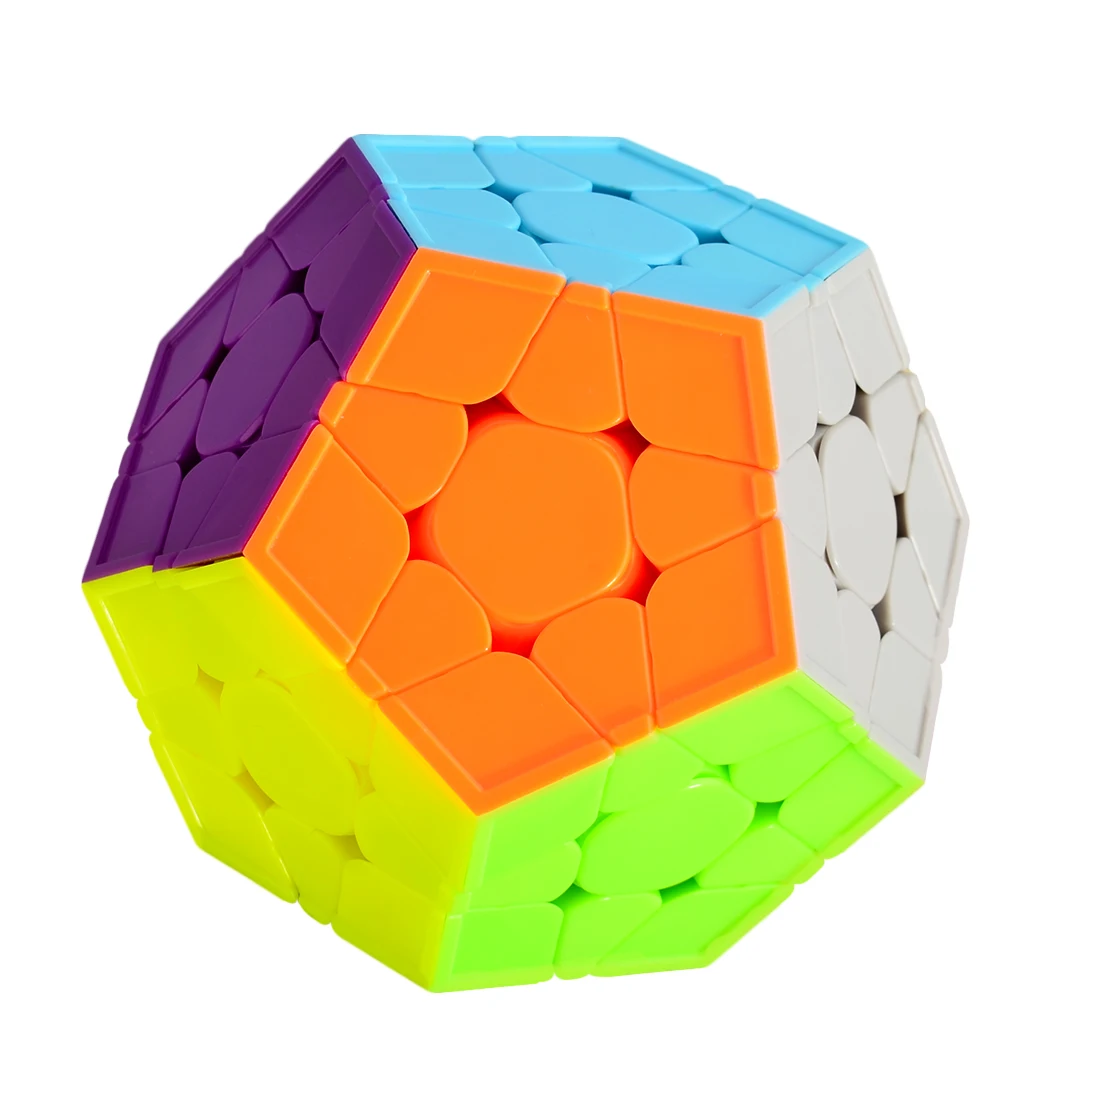 Yuxin Little Magic Smooth Durable Speed Cube 3x3 Dodecahedron Teasers Puzzle Cube Toys For Kids- Colorful